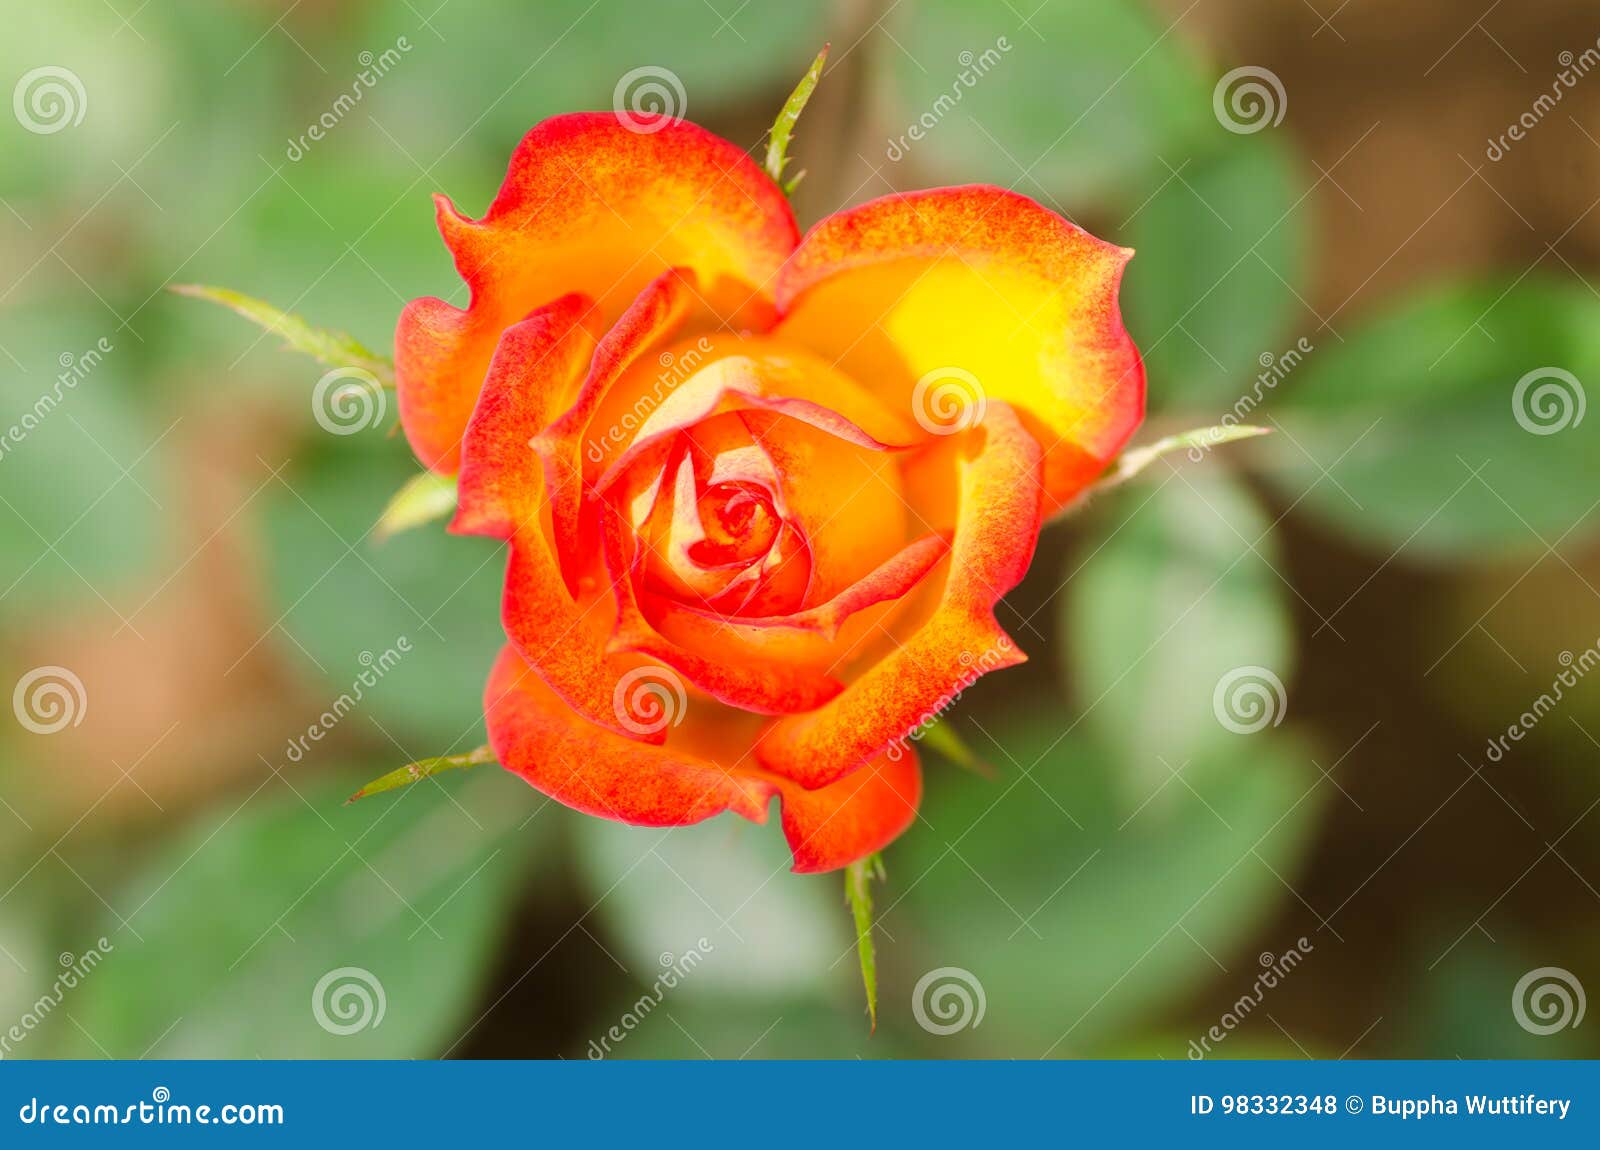 Orange Rose Flower in a Garden Stock Photo - Image of meadow, blooming ...